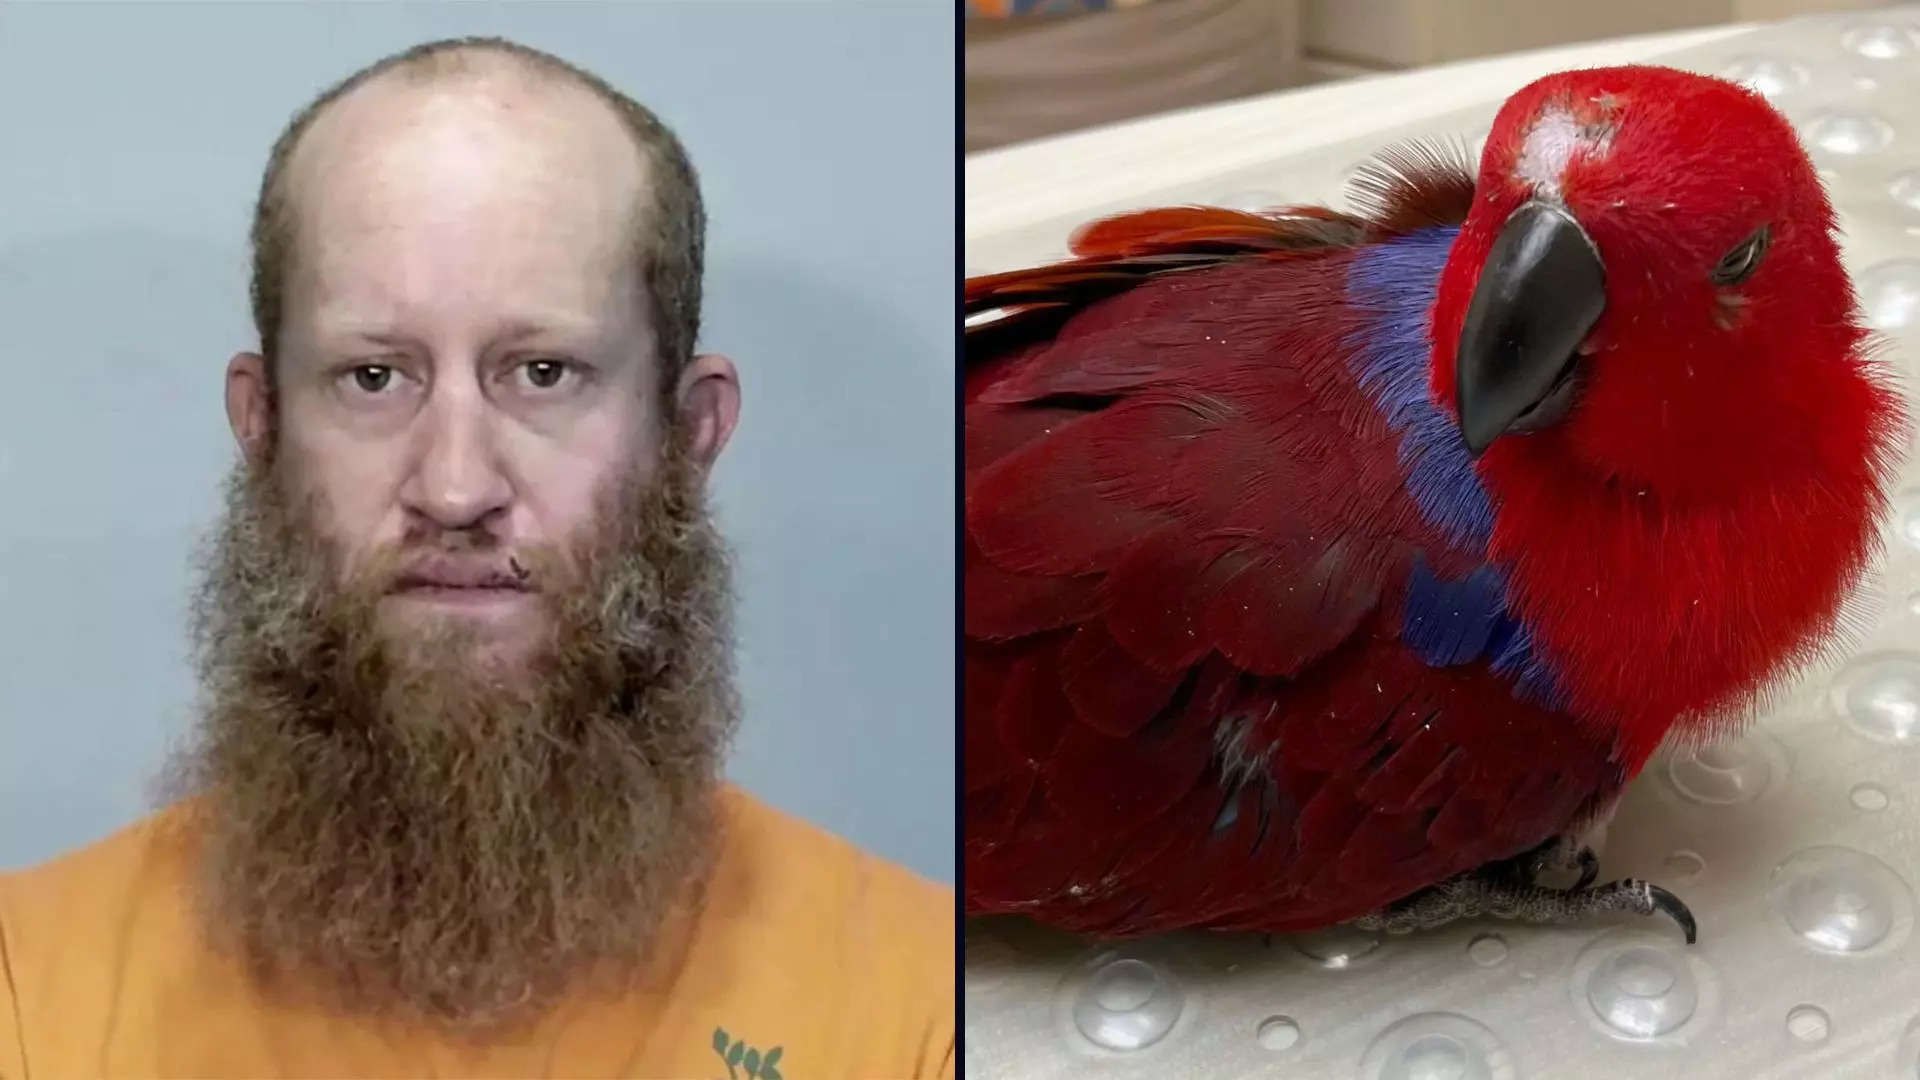 Florida man arrested for grand theft after he sole roommates parrot and left it at a bus stop